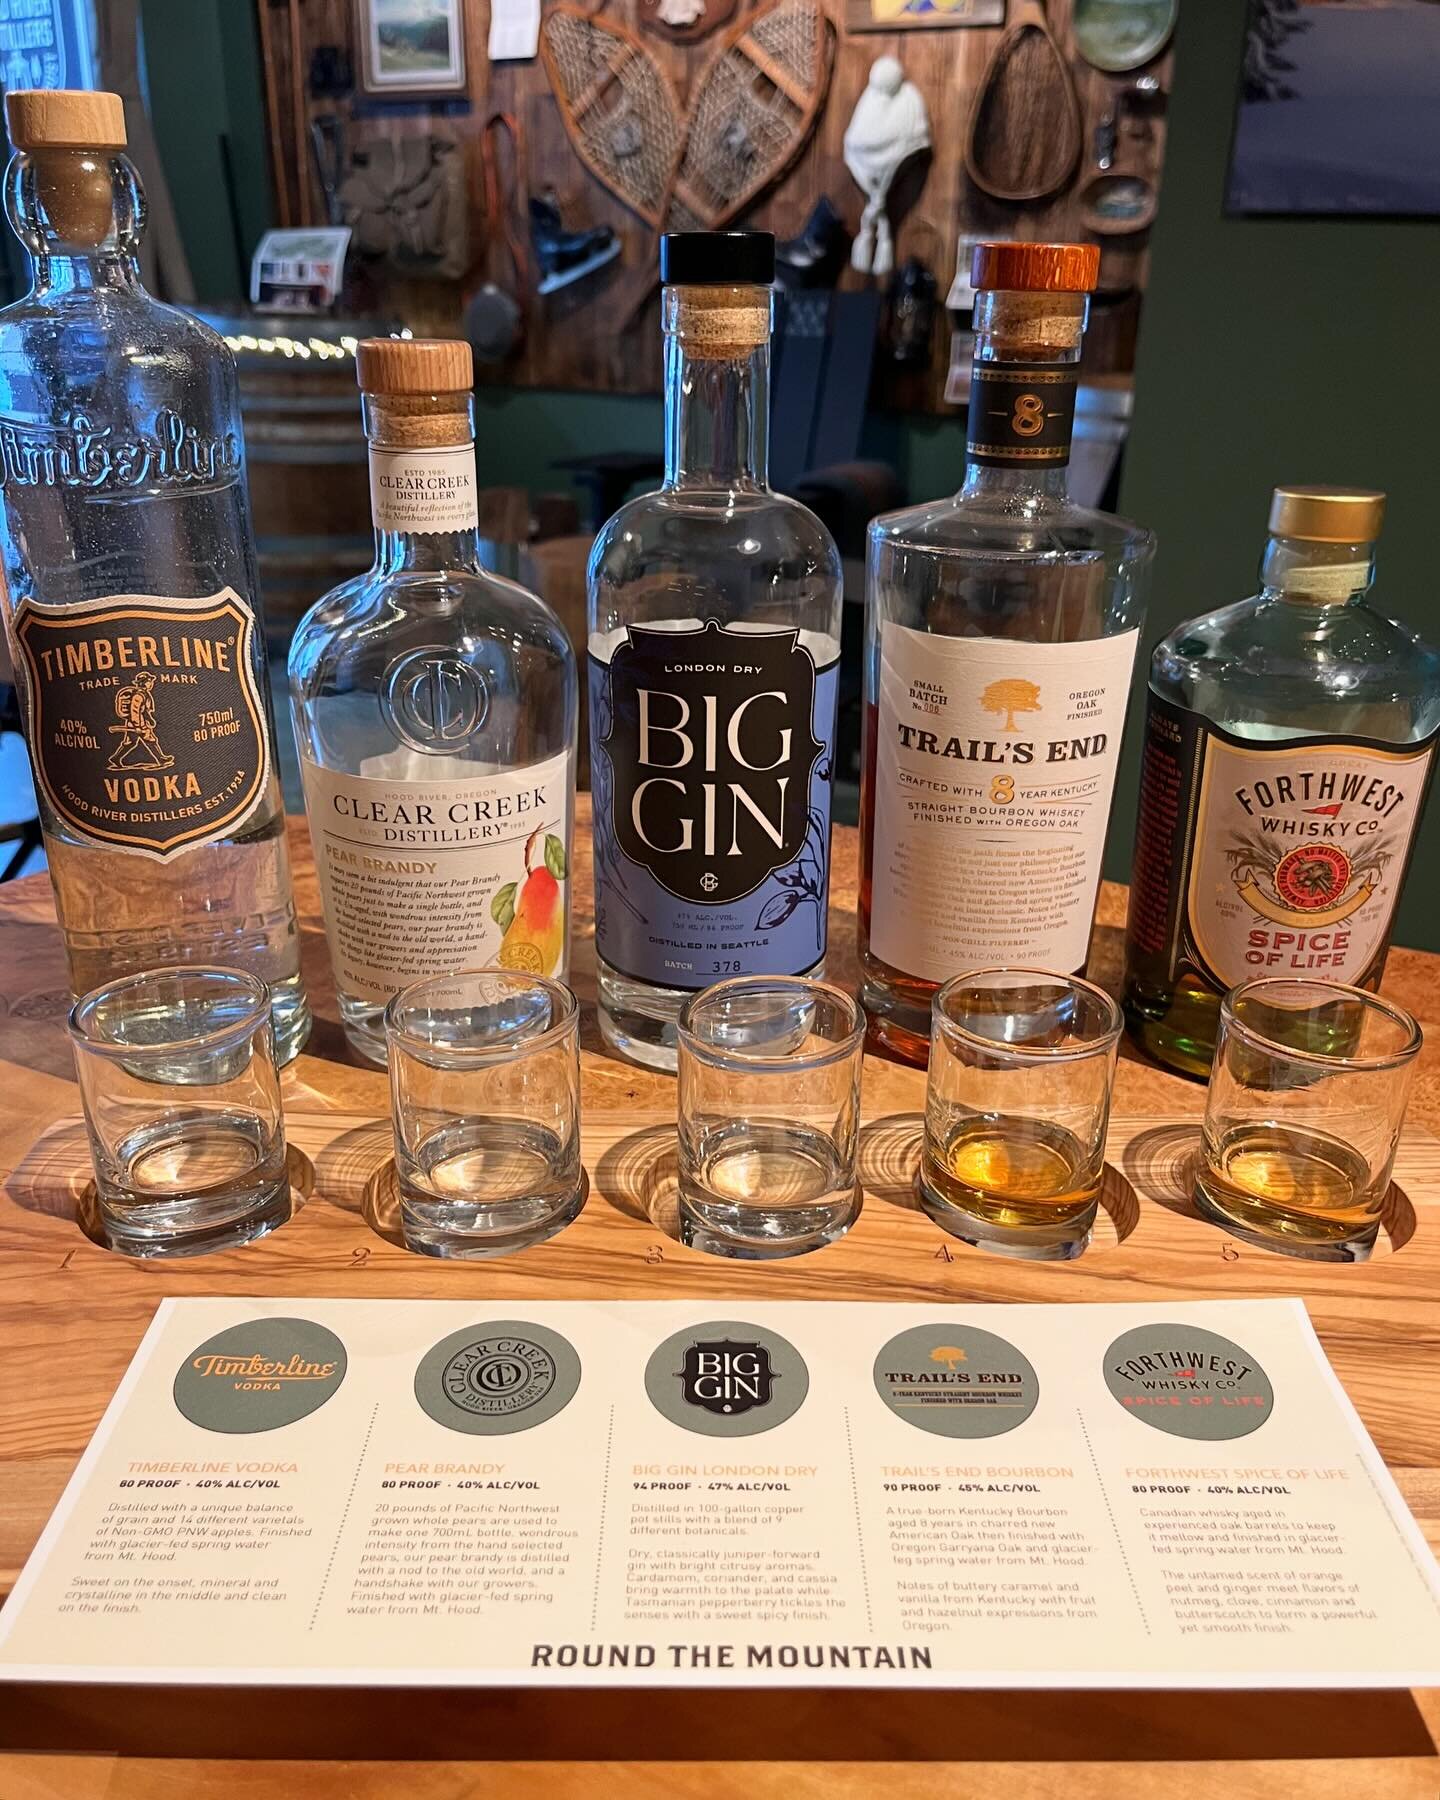 West End Wednesday is back! Join us at the Portland Tasting Outpost next Wednesday, January 31st from 5-8pm for $5 off our tasting flights! @westendwednesdays #downtownpdx #hoodriverdistillers #spiritstasting #vodka #gin #brandy #whiskey #pdx